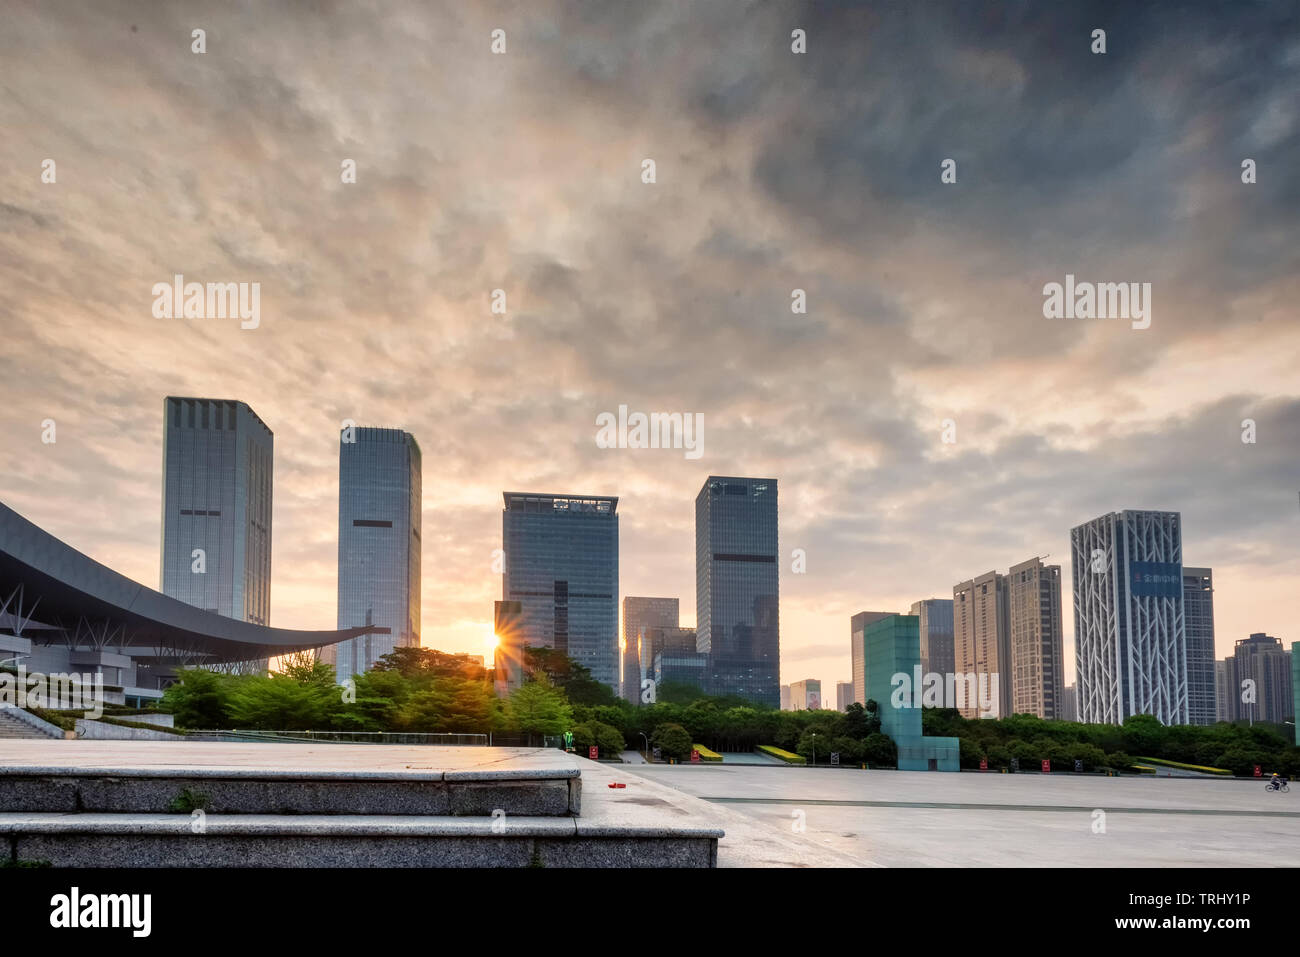 SHENZHEN, CHINA - APR 11:  The brand new skyline at Shenzhen, China on April 11, 2018. The city is reputable for being a technology hub right across f Stock Photo